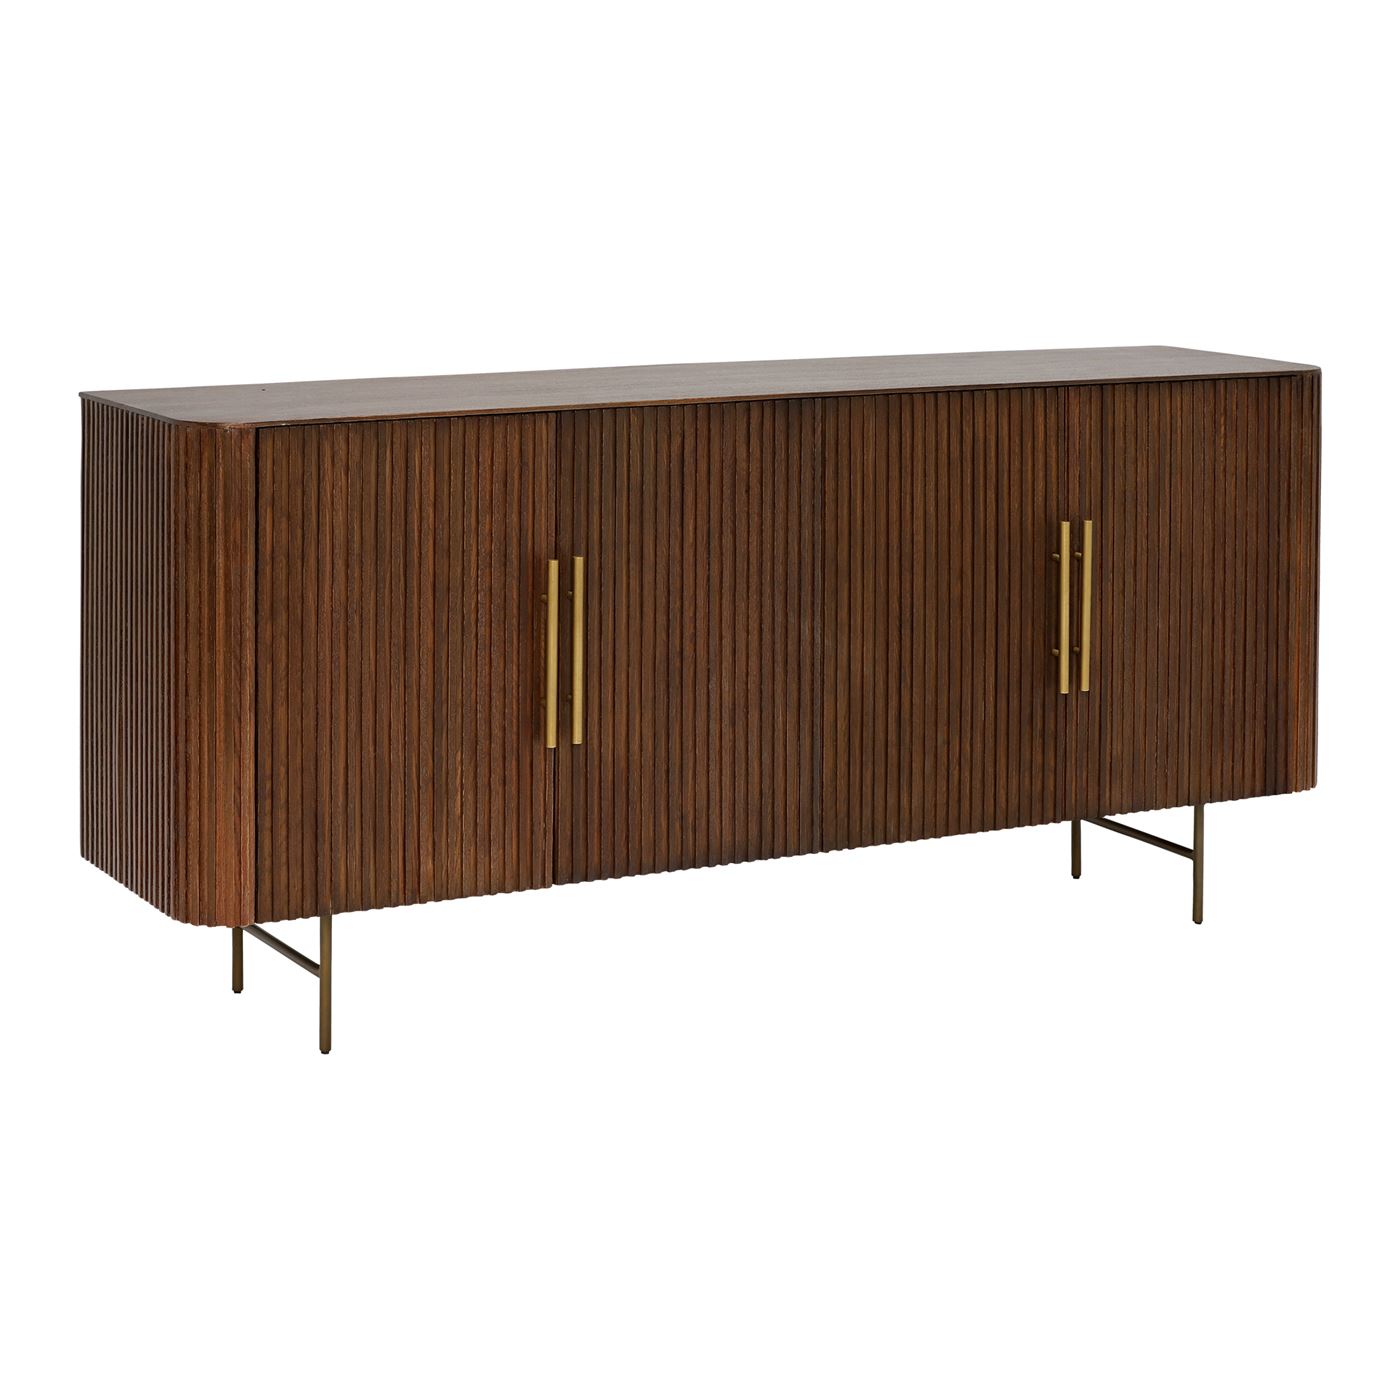 Photo of Anatolia sideboard in brown